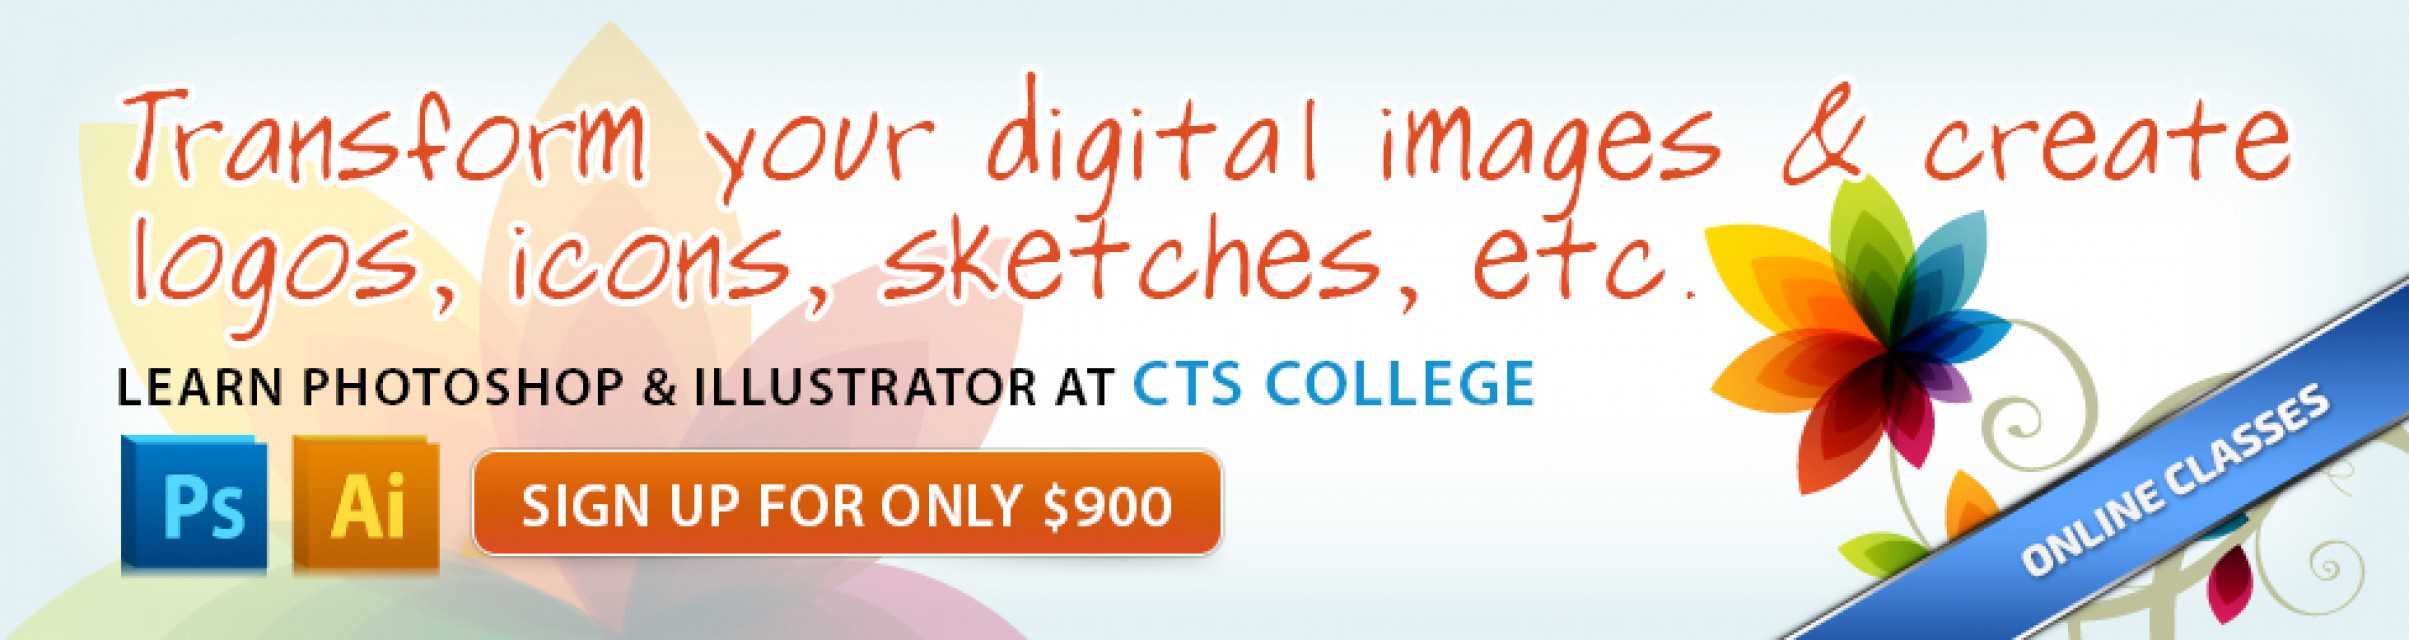 Cts College